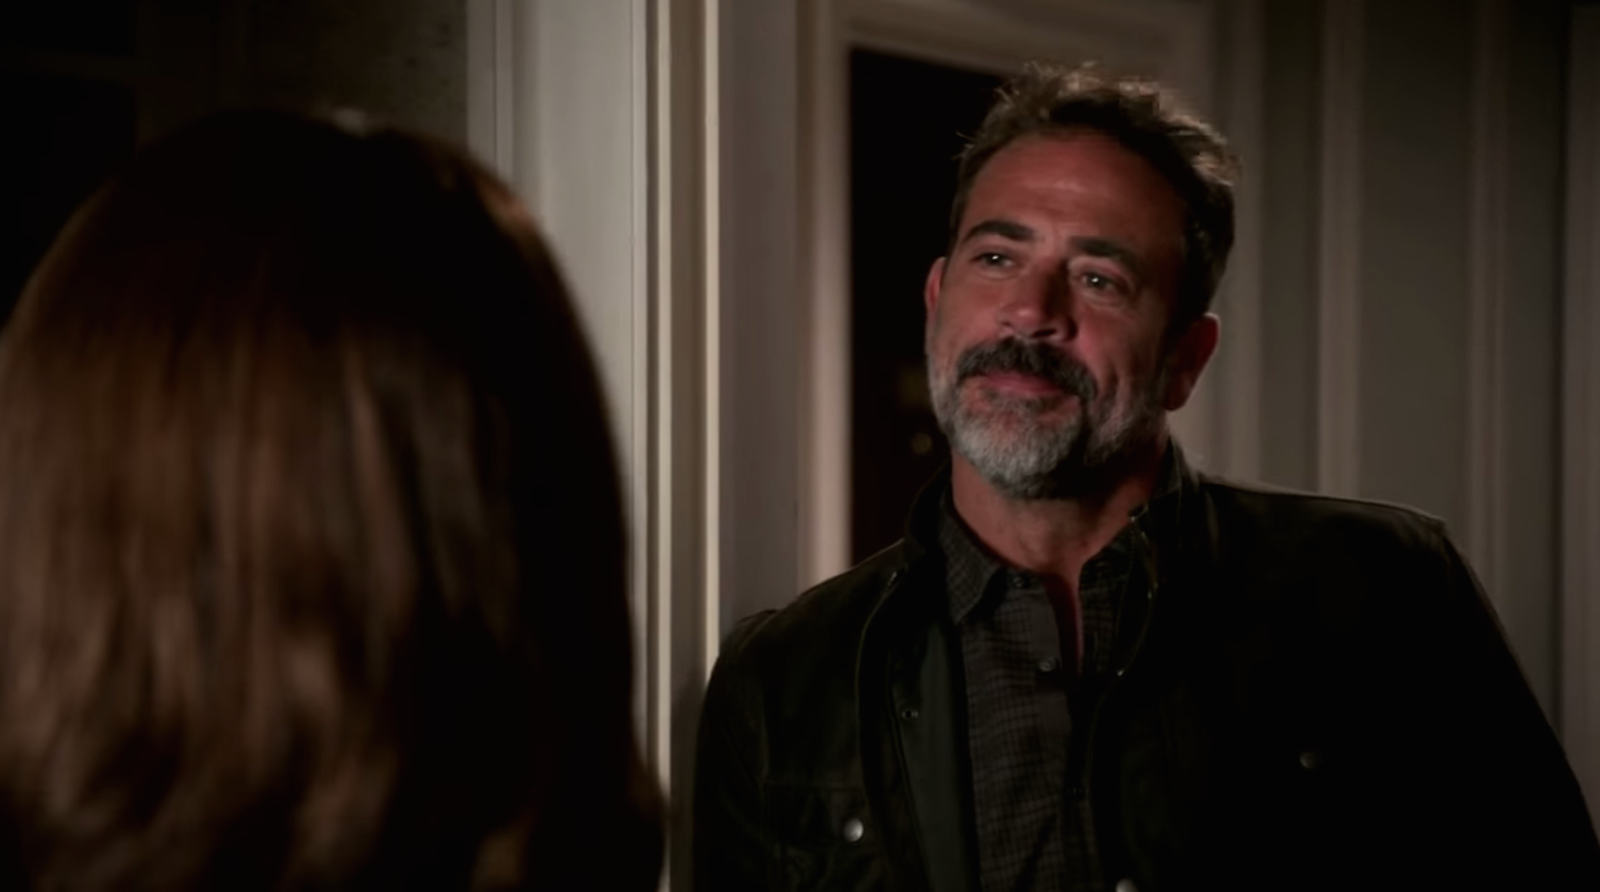 The Good Wife - Innocents - Review: "You're Being Used"